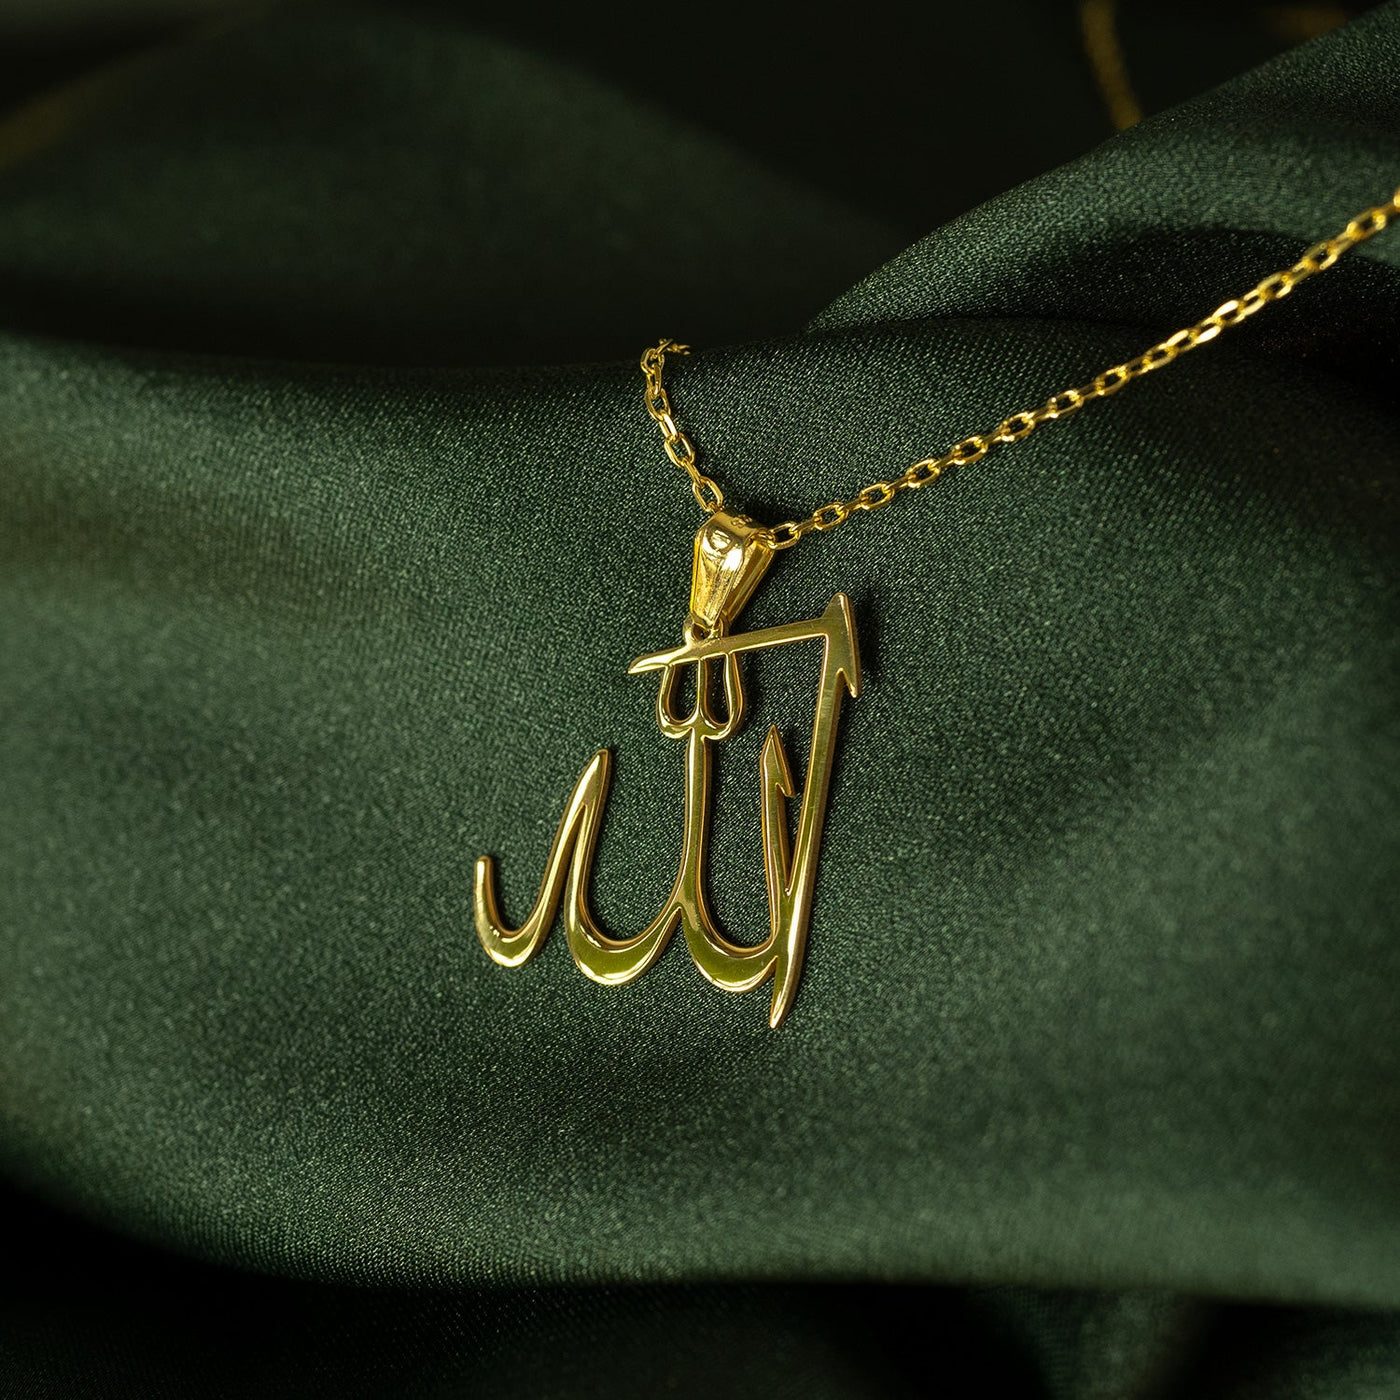 Allah Necklace 925 Sterling Silver - WAMT005